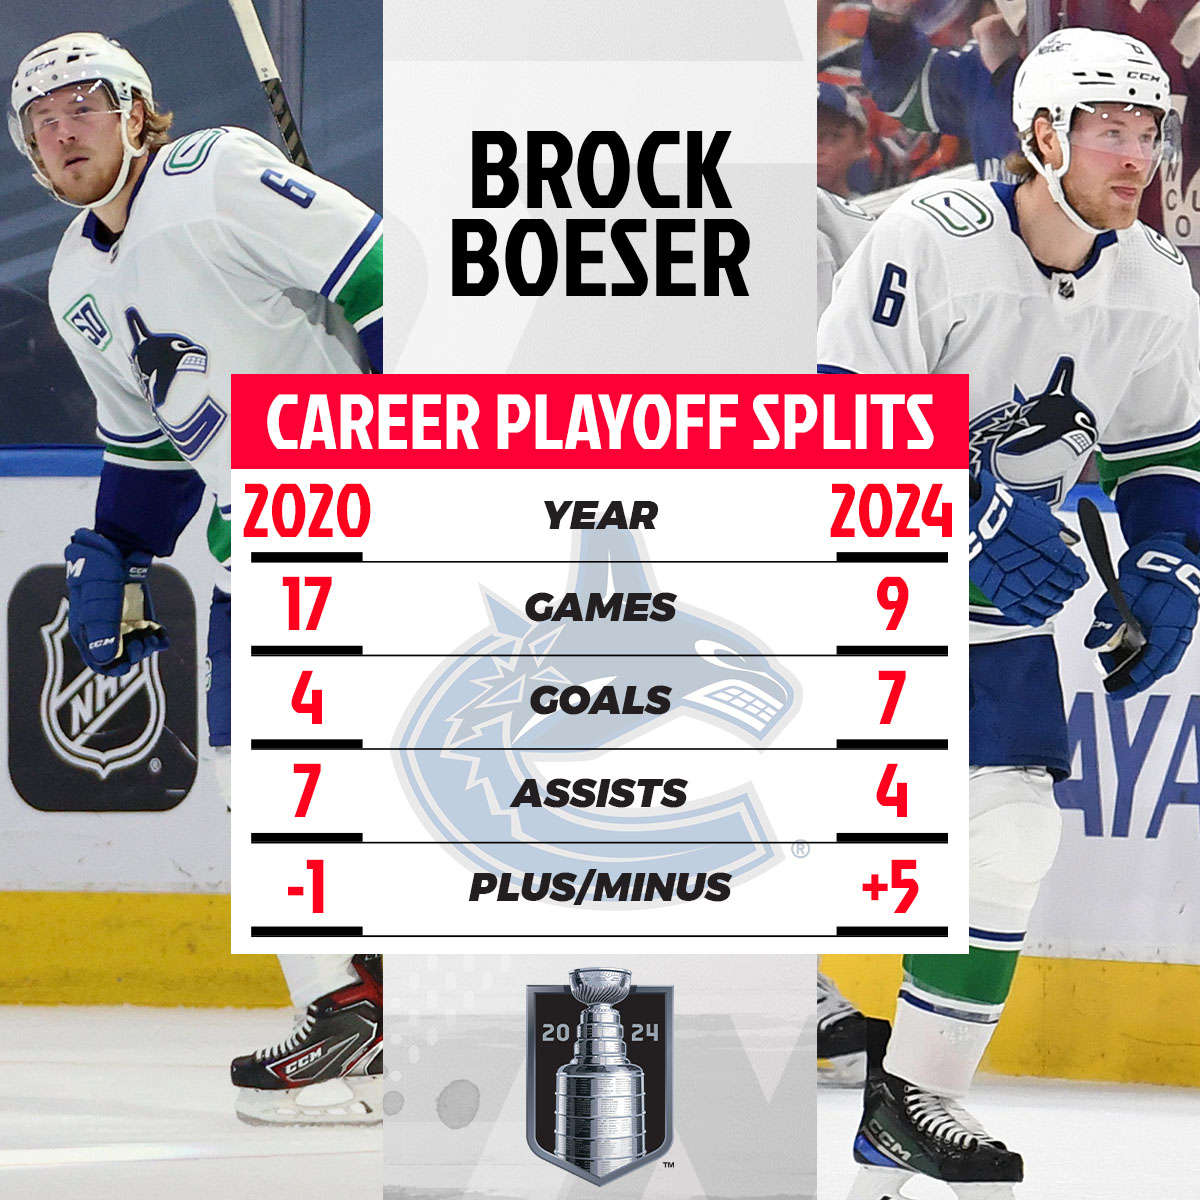 Brock Boeser is dominating in his second #StanleyCup Playoff appearance. 

@Canucks | #Canucks